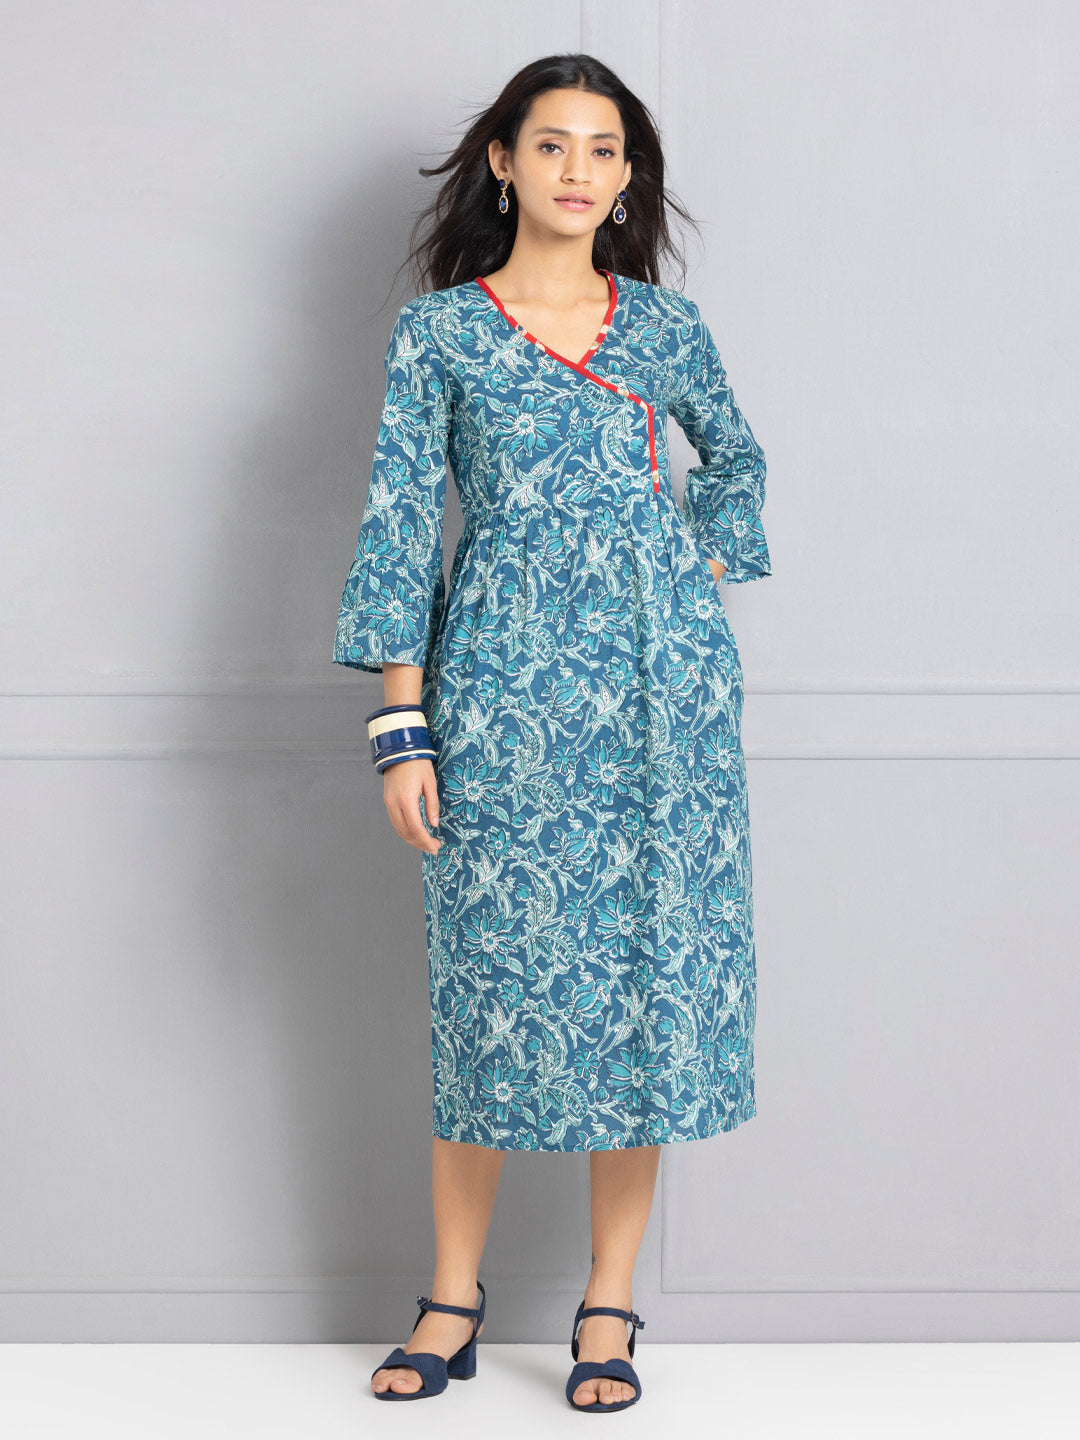 Teal Floral Ethnic Dress from Shaye , Dress for women